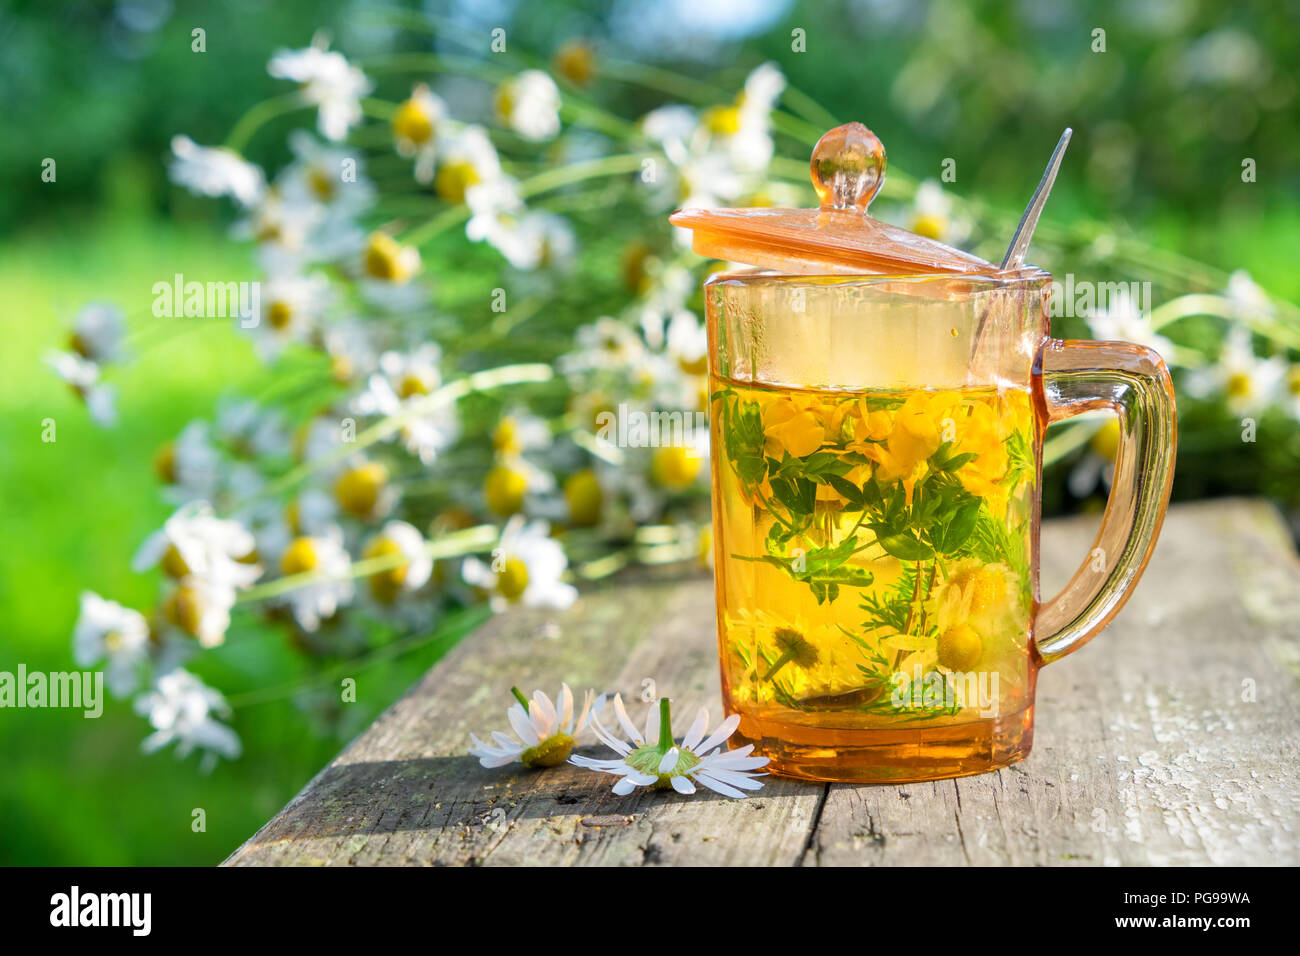 Healthy herbal tea cup and daisy medicinal herbs bunches on wooden board outdoors. Stock Photo